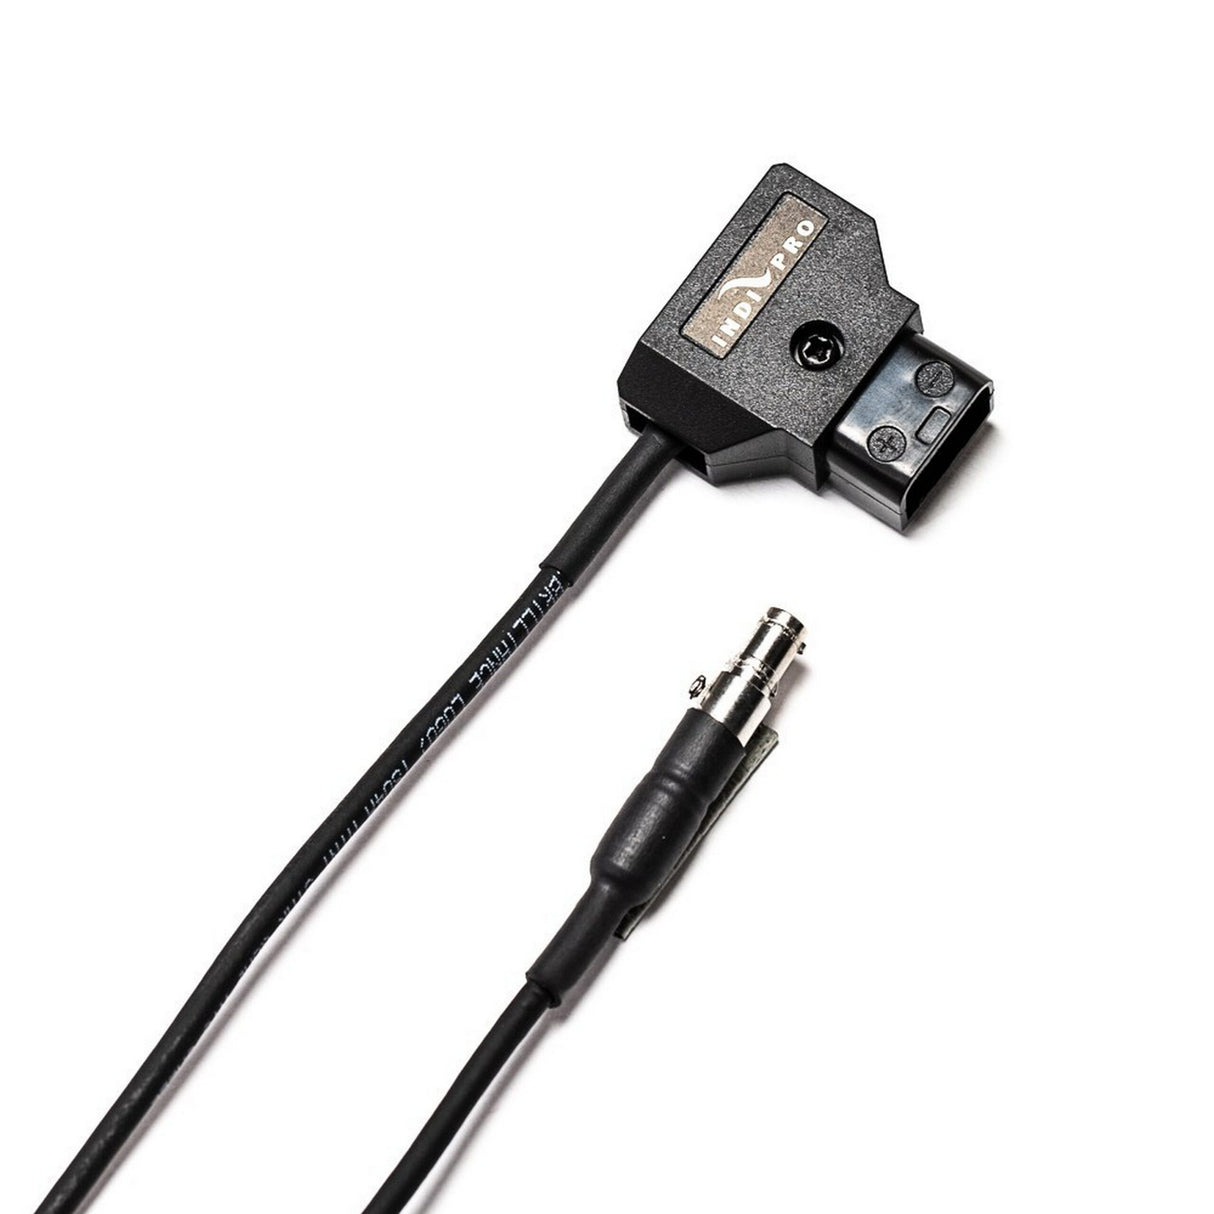 IndiPRO NYPPR D-Tap to Odyssey Power Cable, 36-Inch